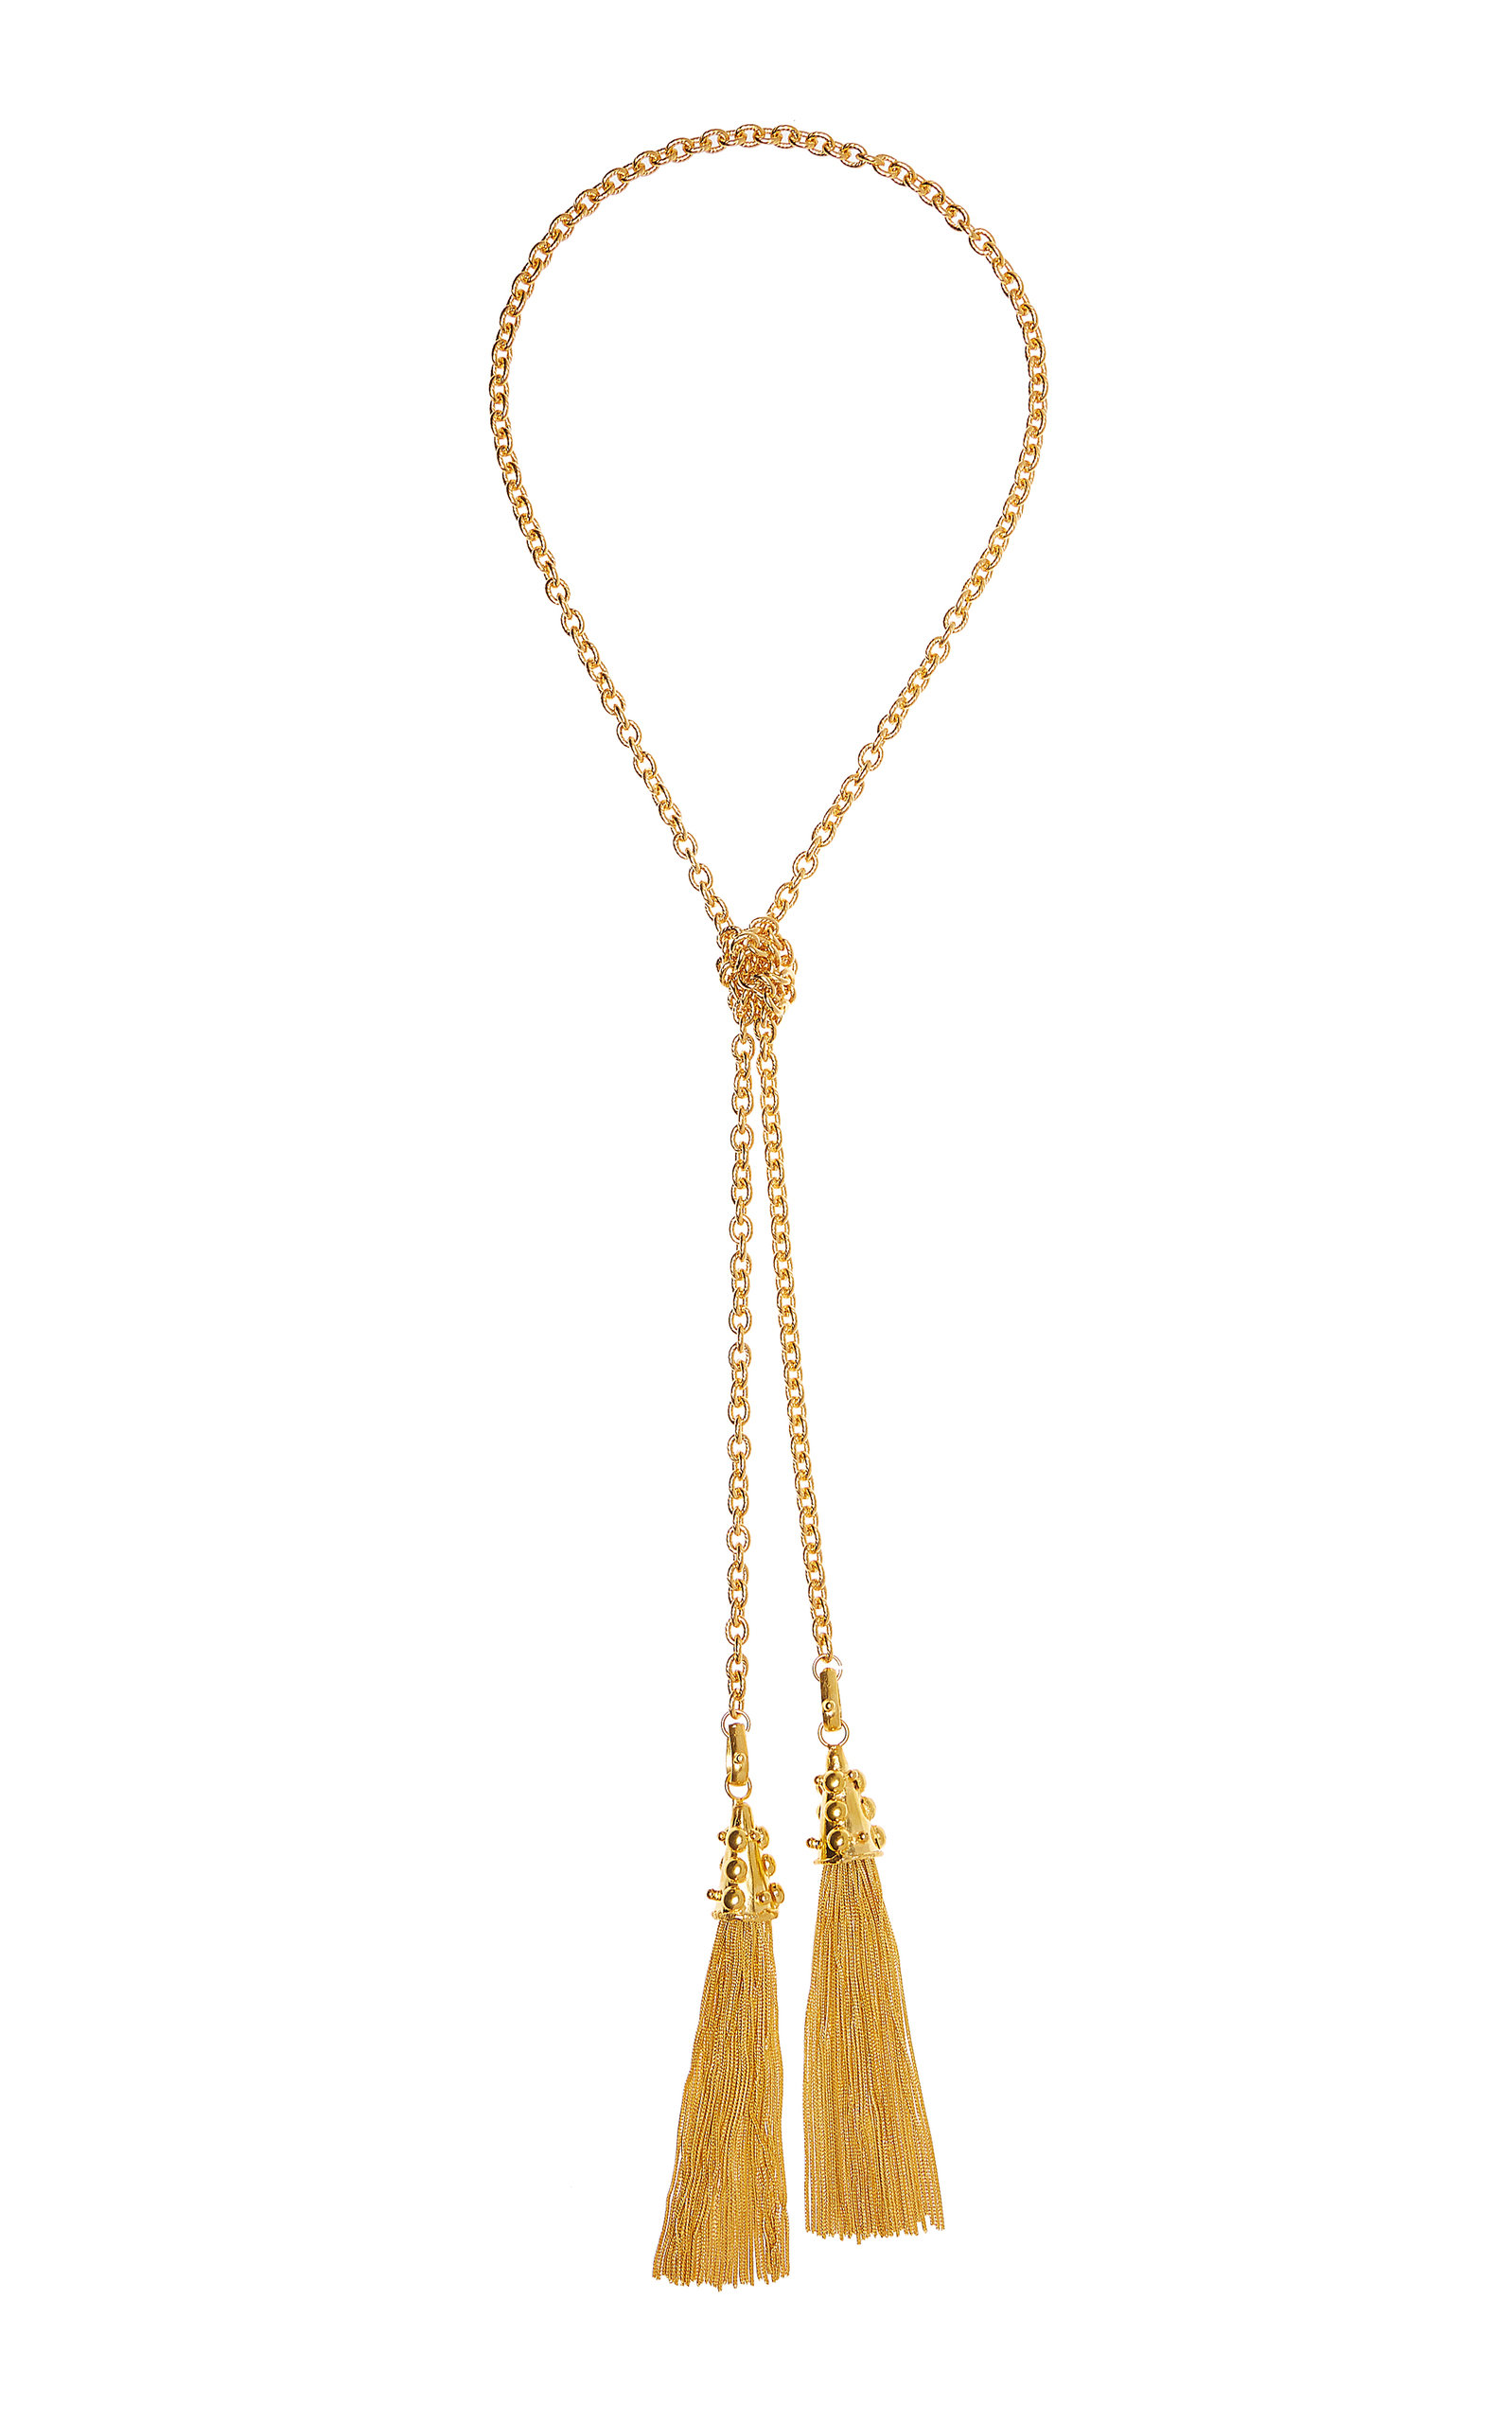 2 Pompons 22K Gold-Plated Necklace